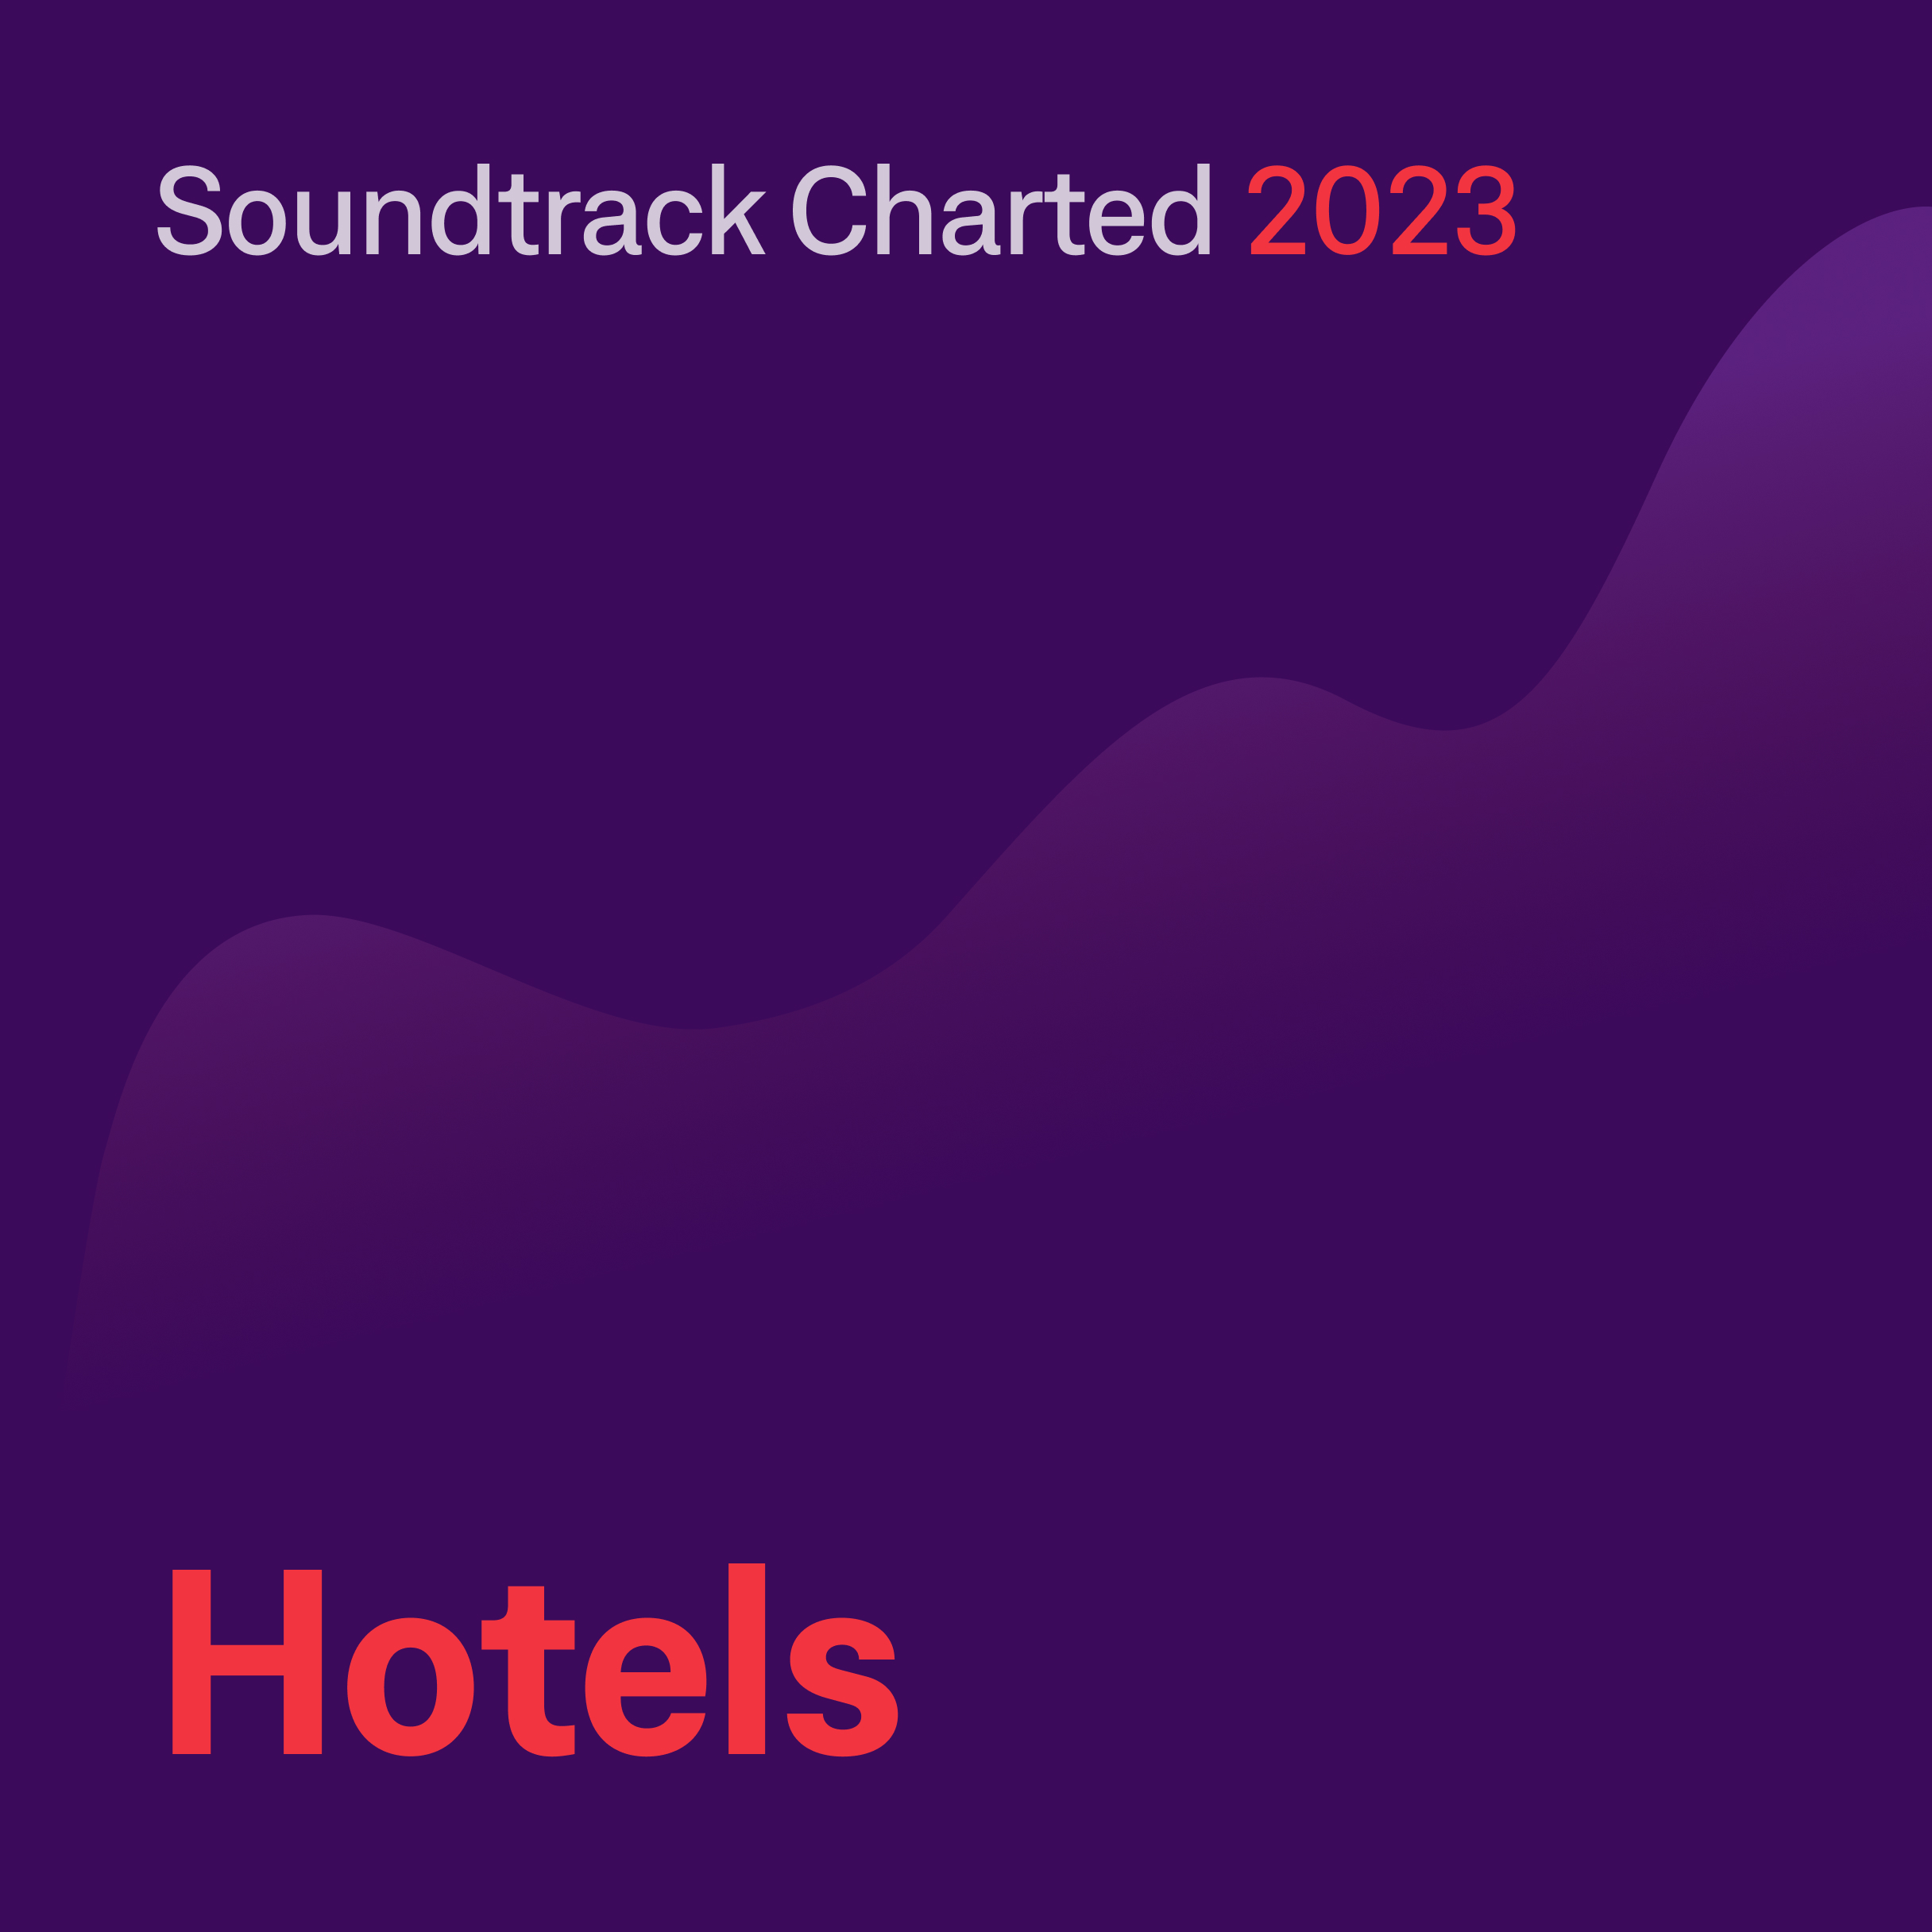 Soundtrack Charted 2023 - hotel